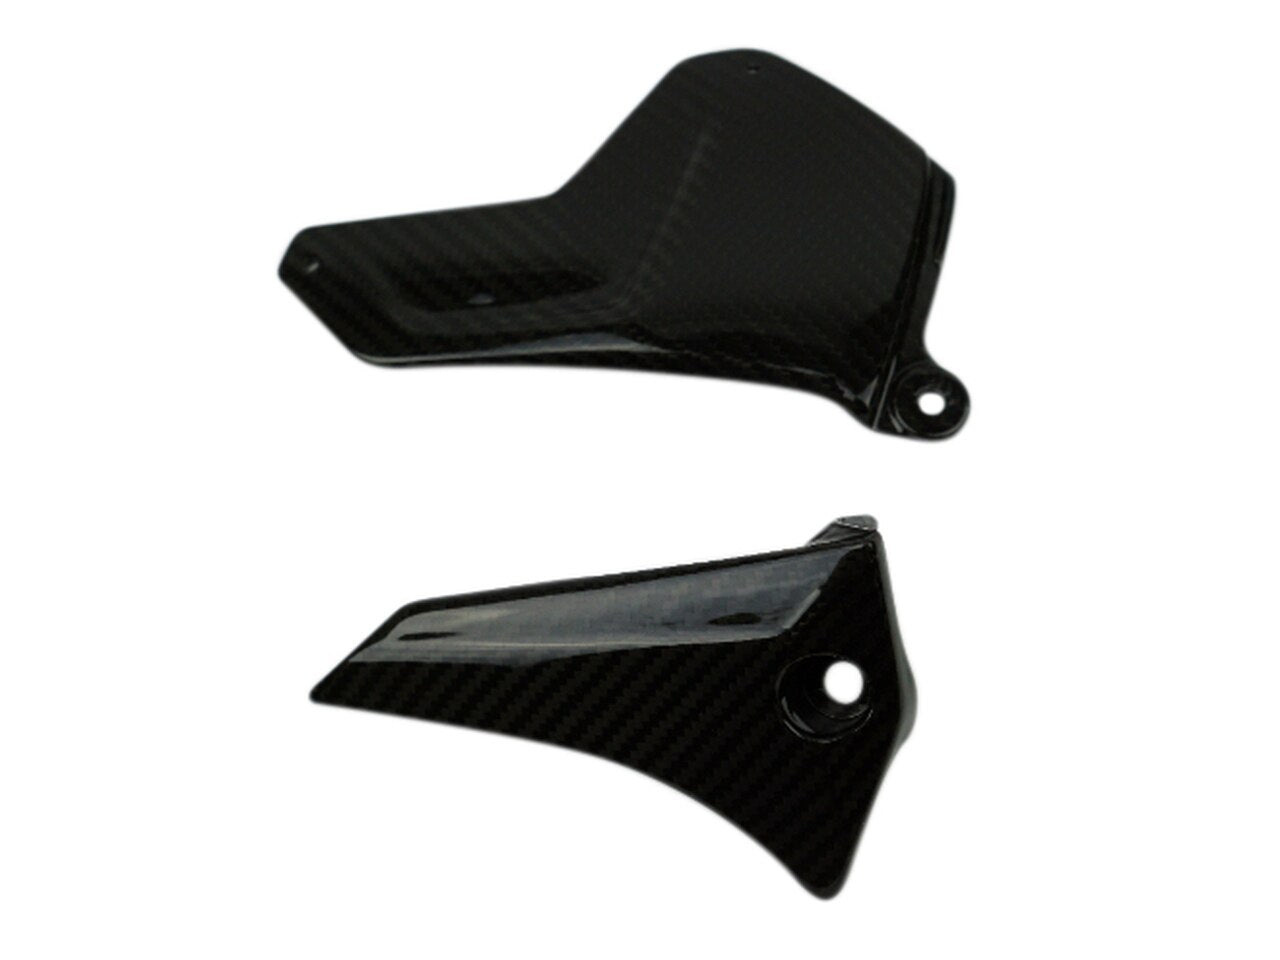 Motocomposites Chain Guard and Swing Arm Protector Set in Carbon with Fiberglass for Kawasaki Ninja H2